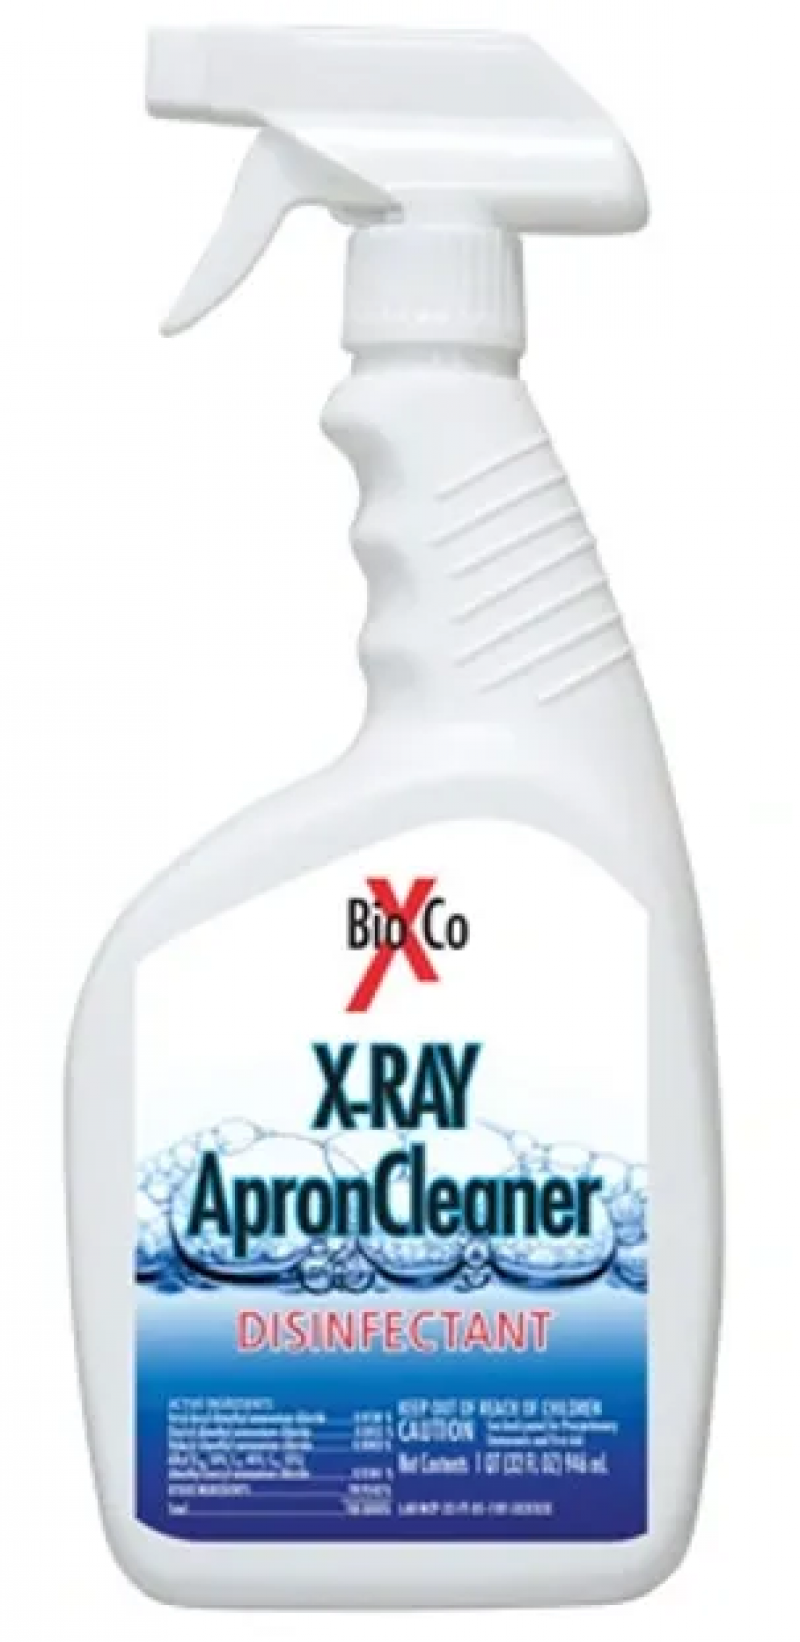 X-RAY Apron Cleaner Disinfectant Spray